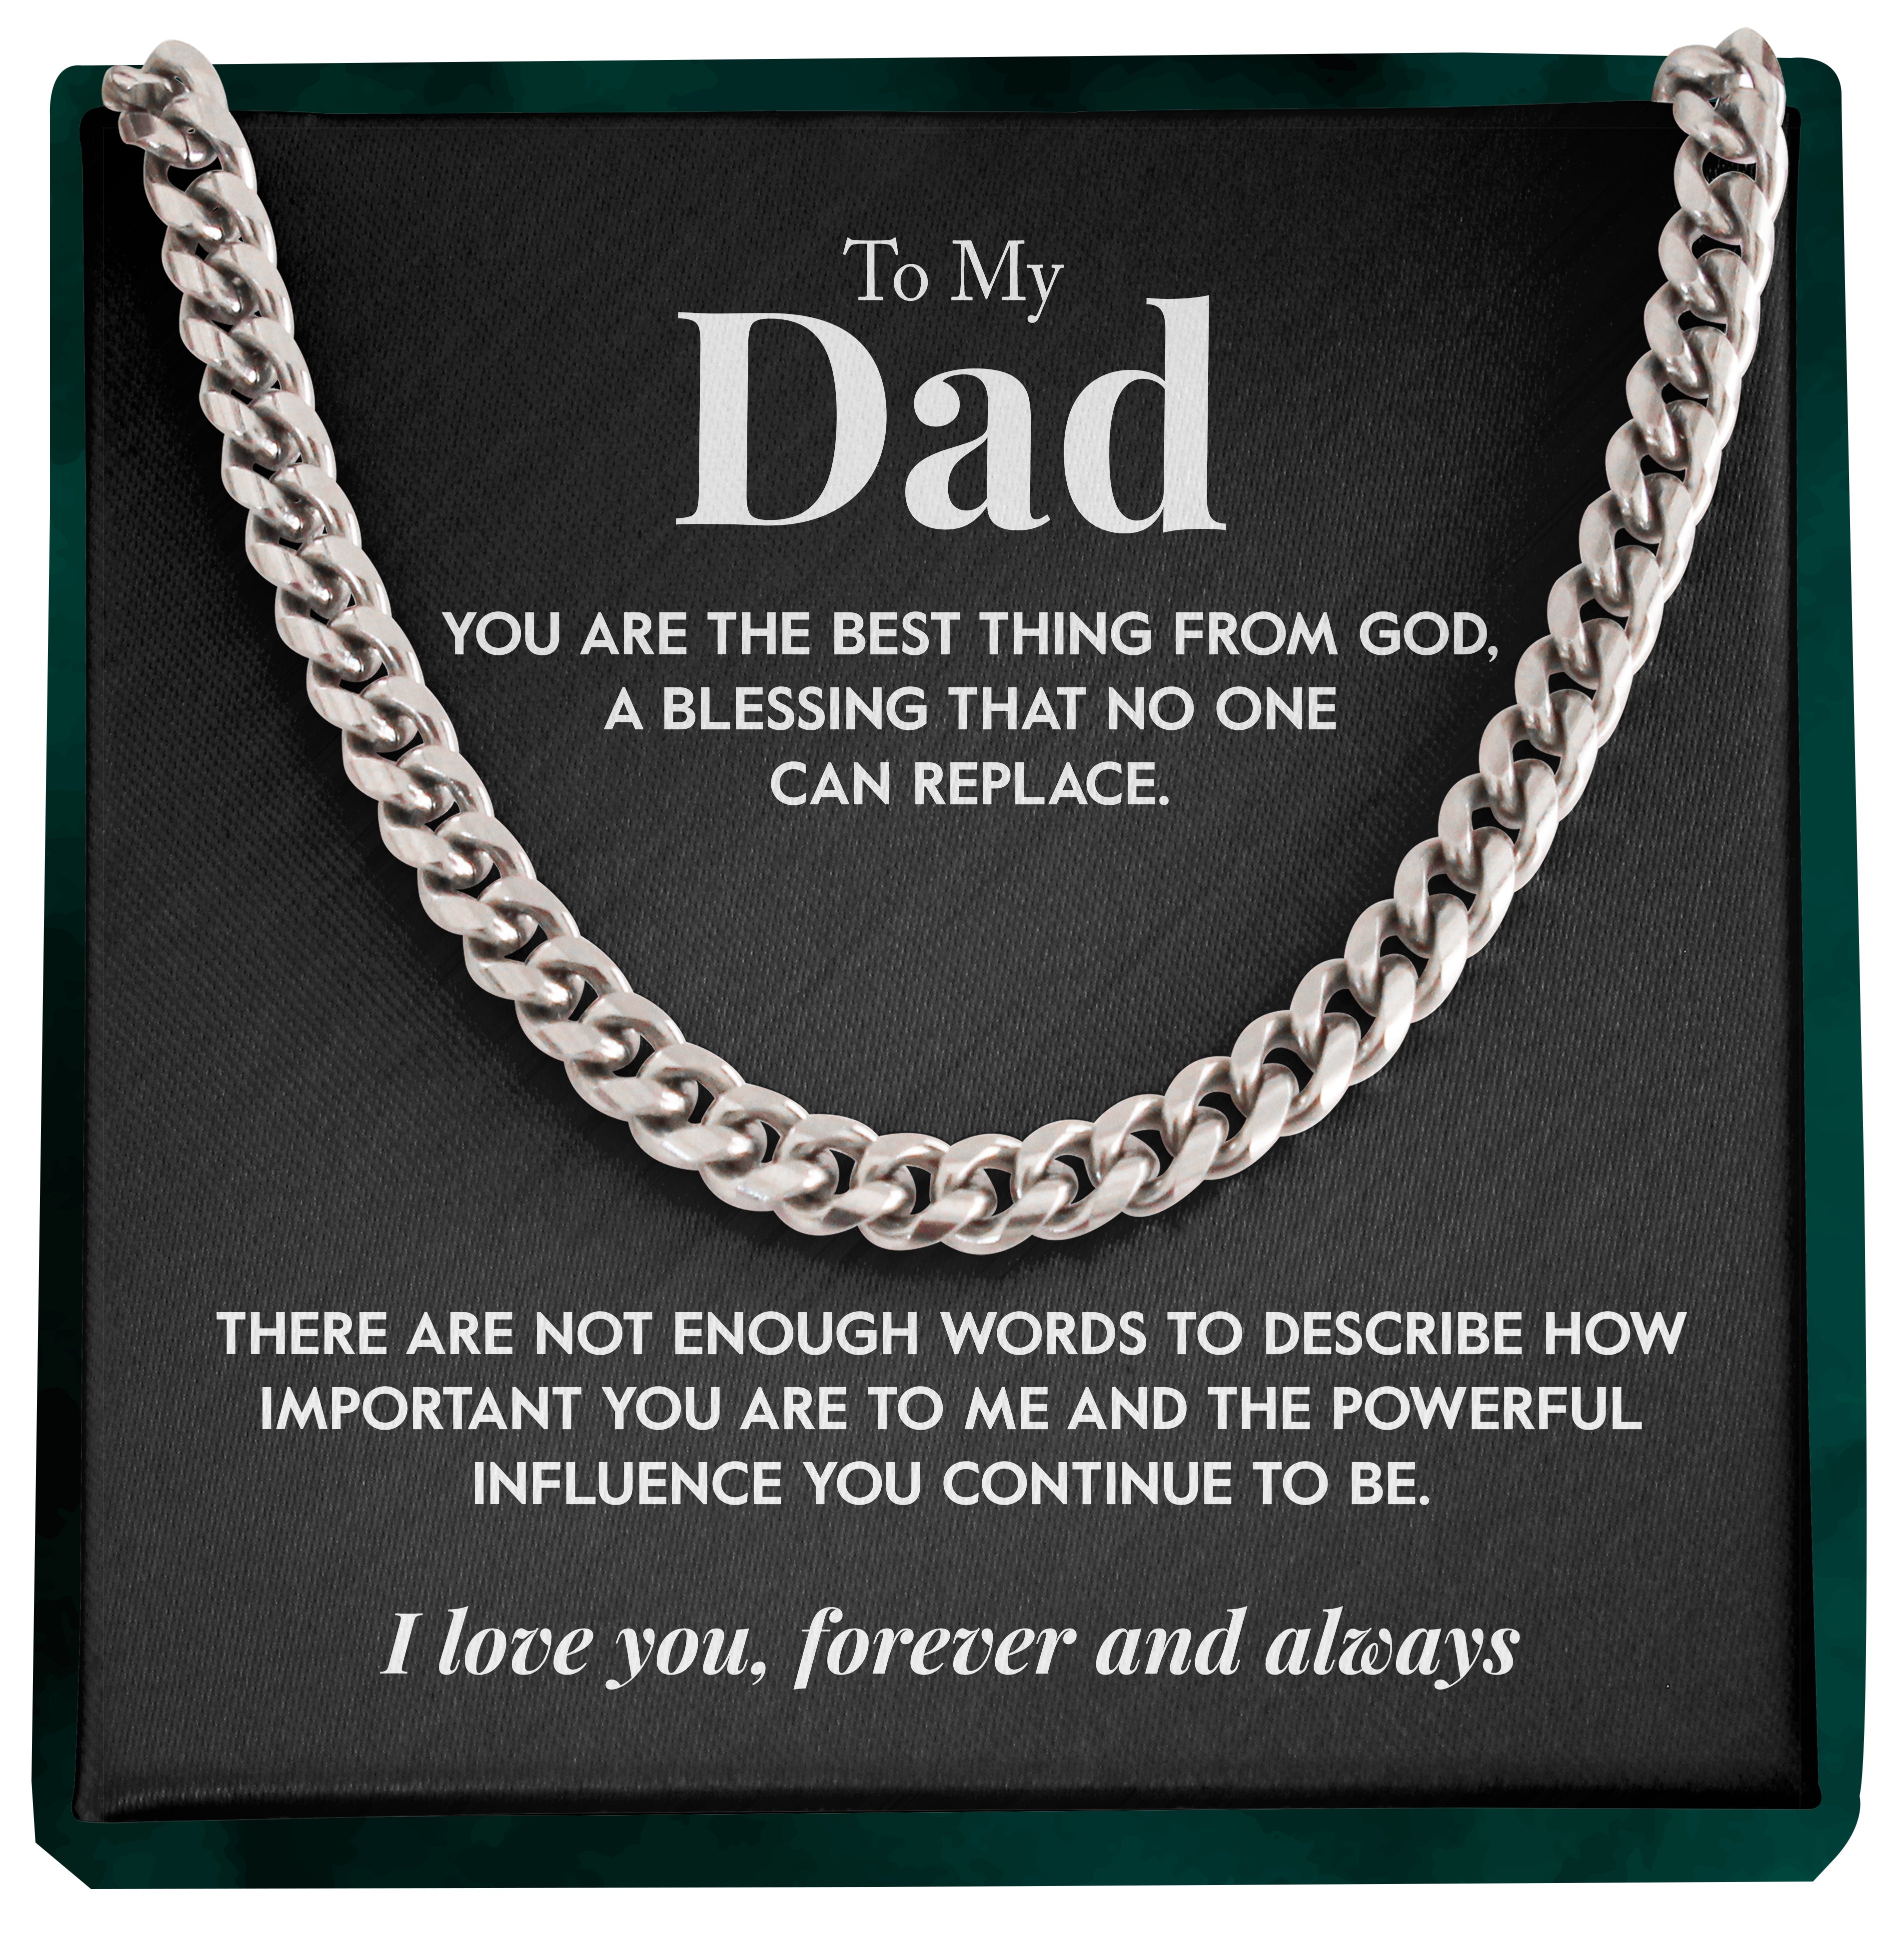 To My Dad | "Powerful Influence" | Cuban Chain Link